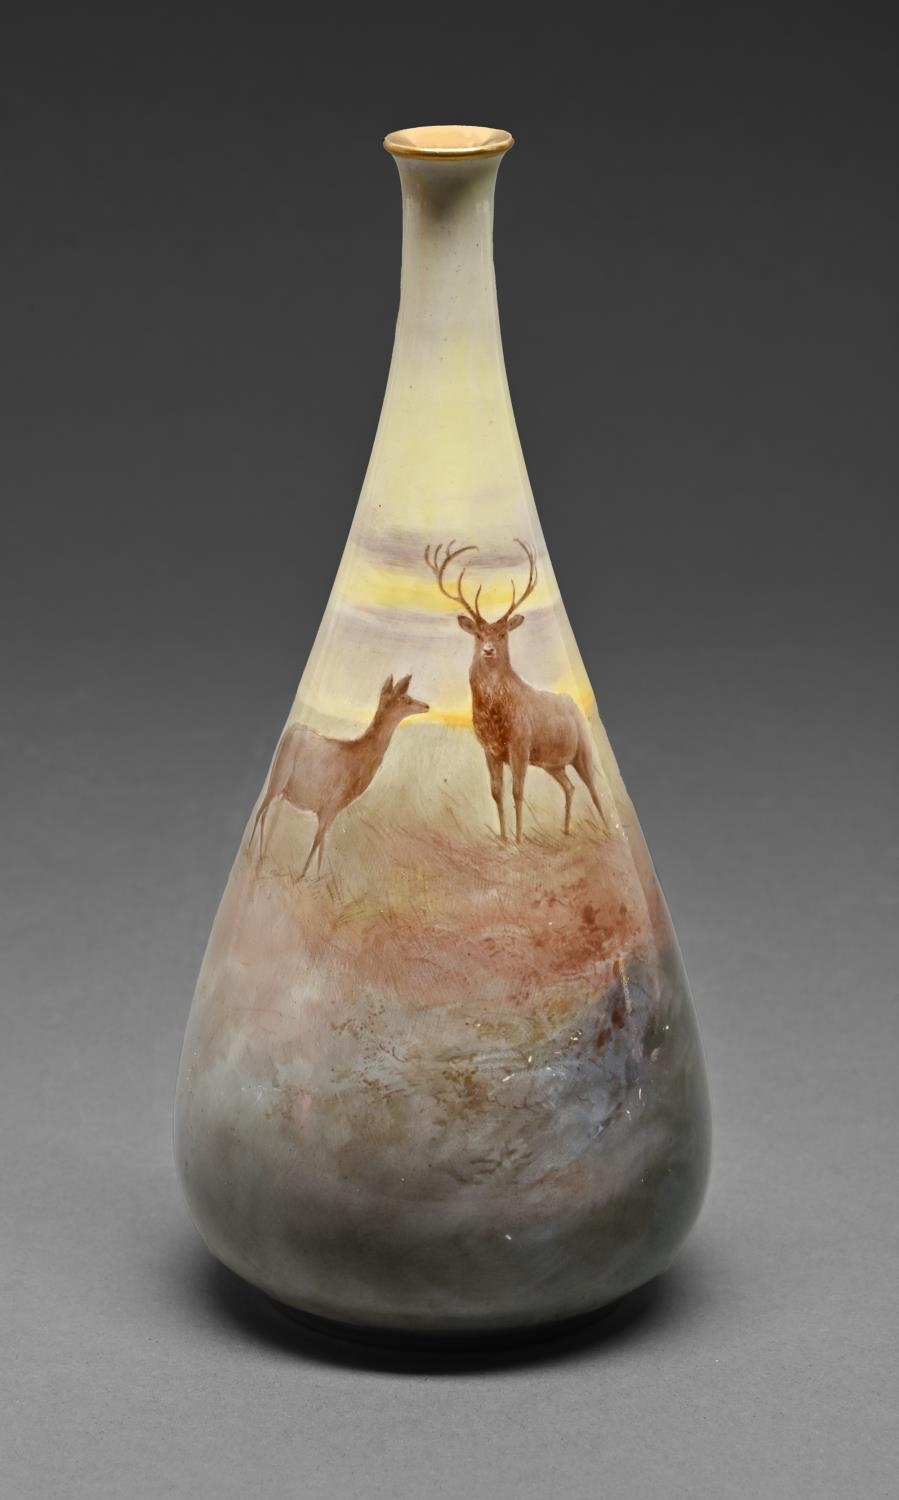 A Royal Doulton Luscian Ware vase, c1900, painted by J Hancock, signed, with a stag and doe in a